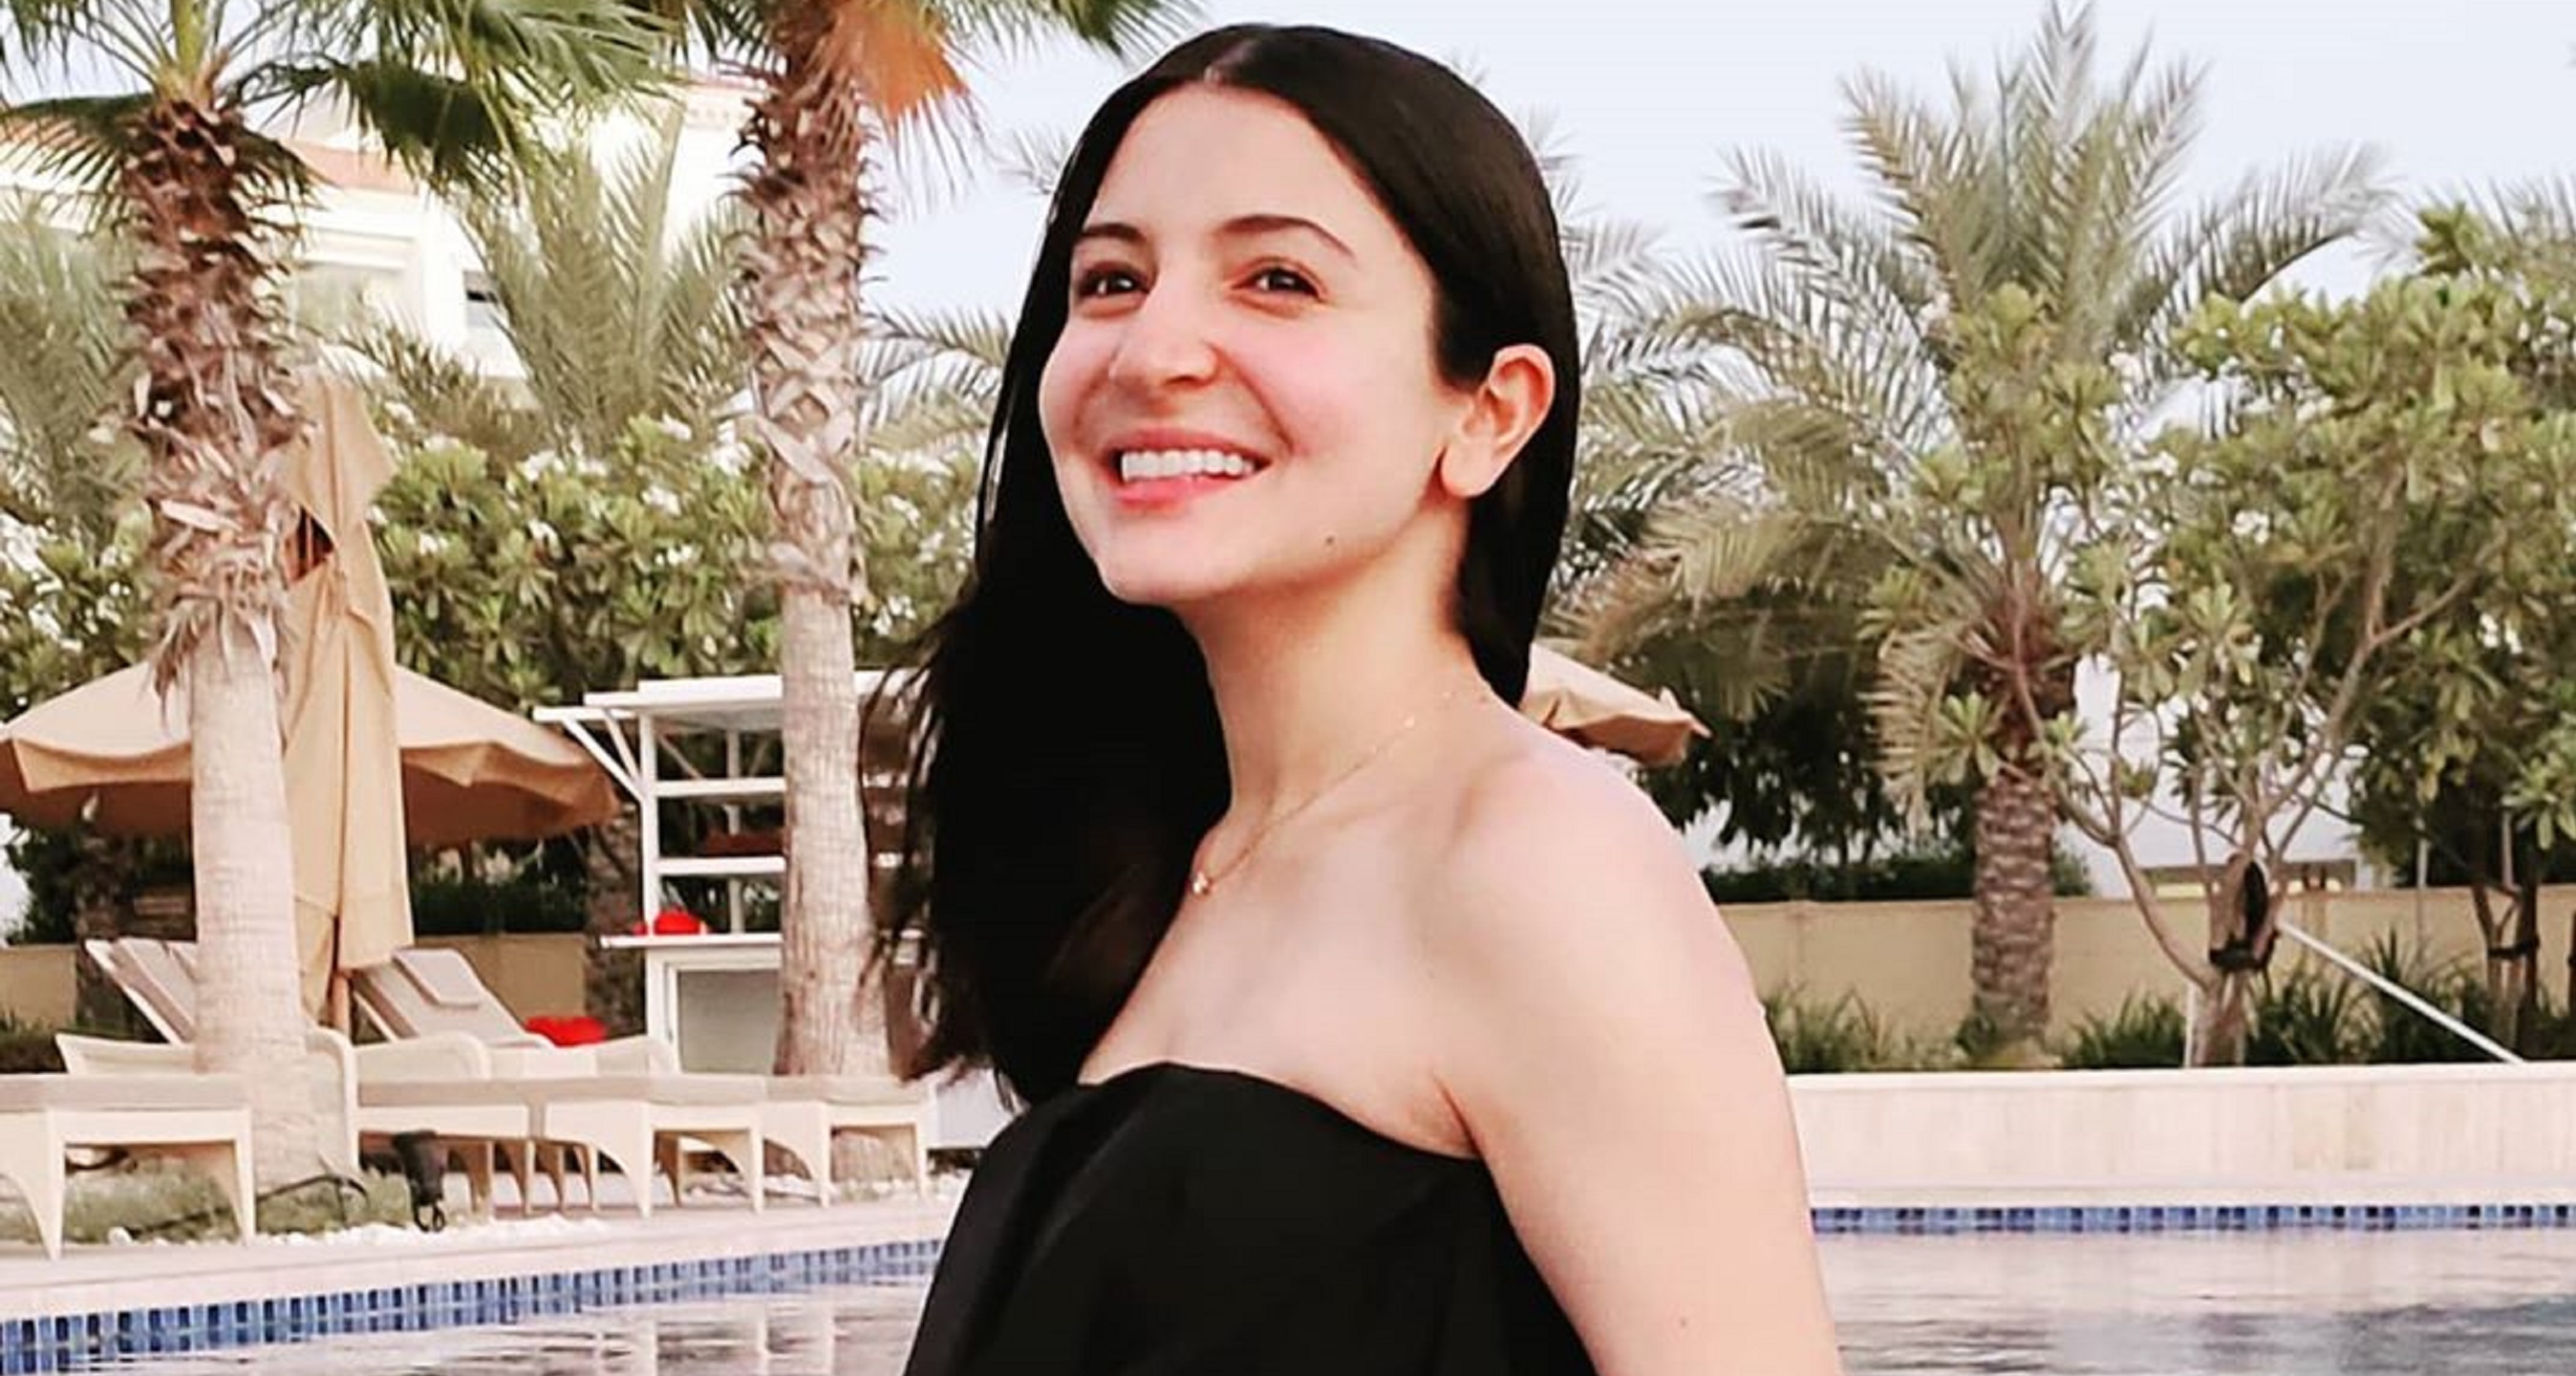 Anushka Sharma Shows Baby Bump in Pool Photo, “Acknowledging the good in life”